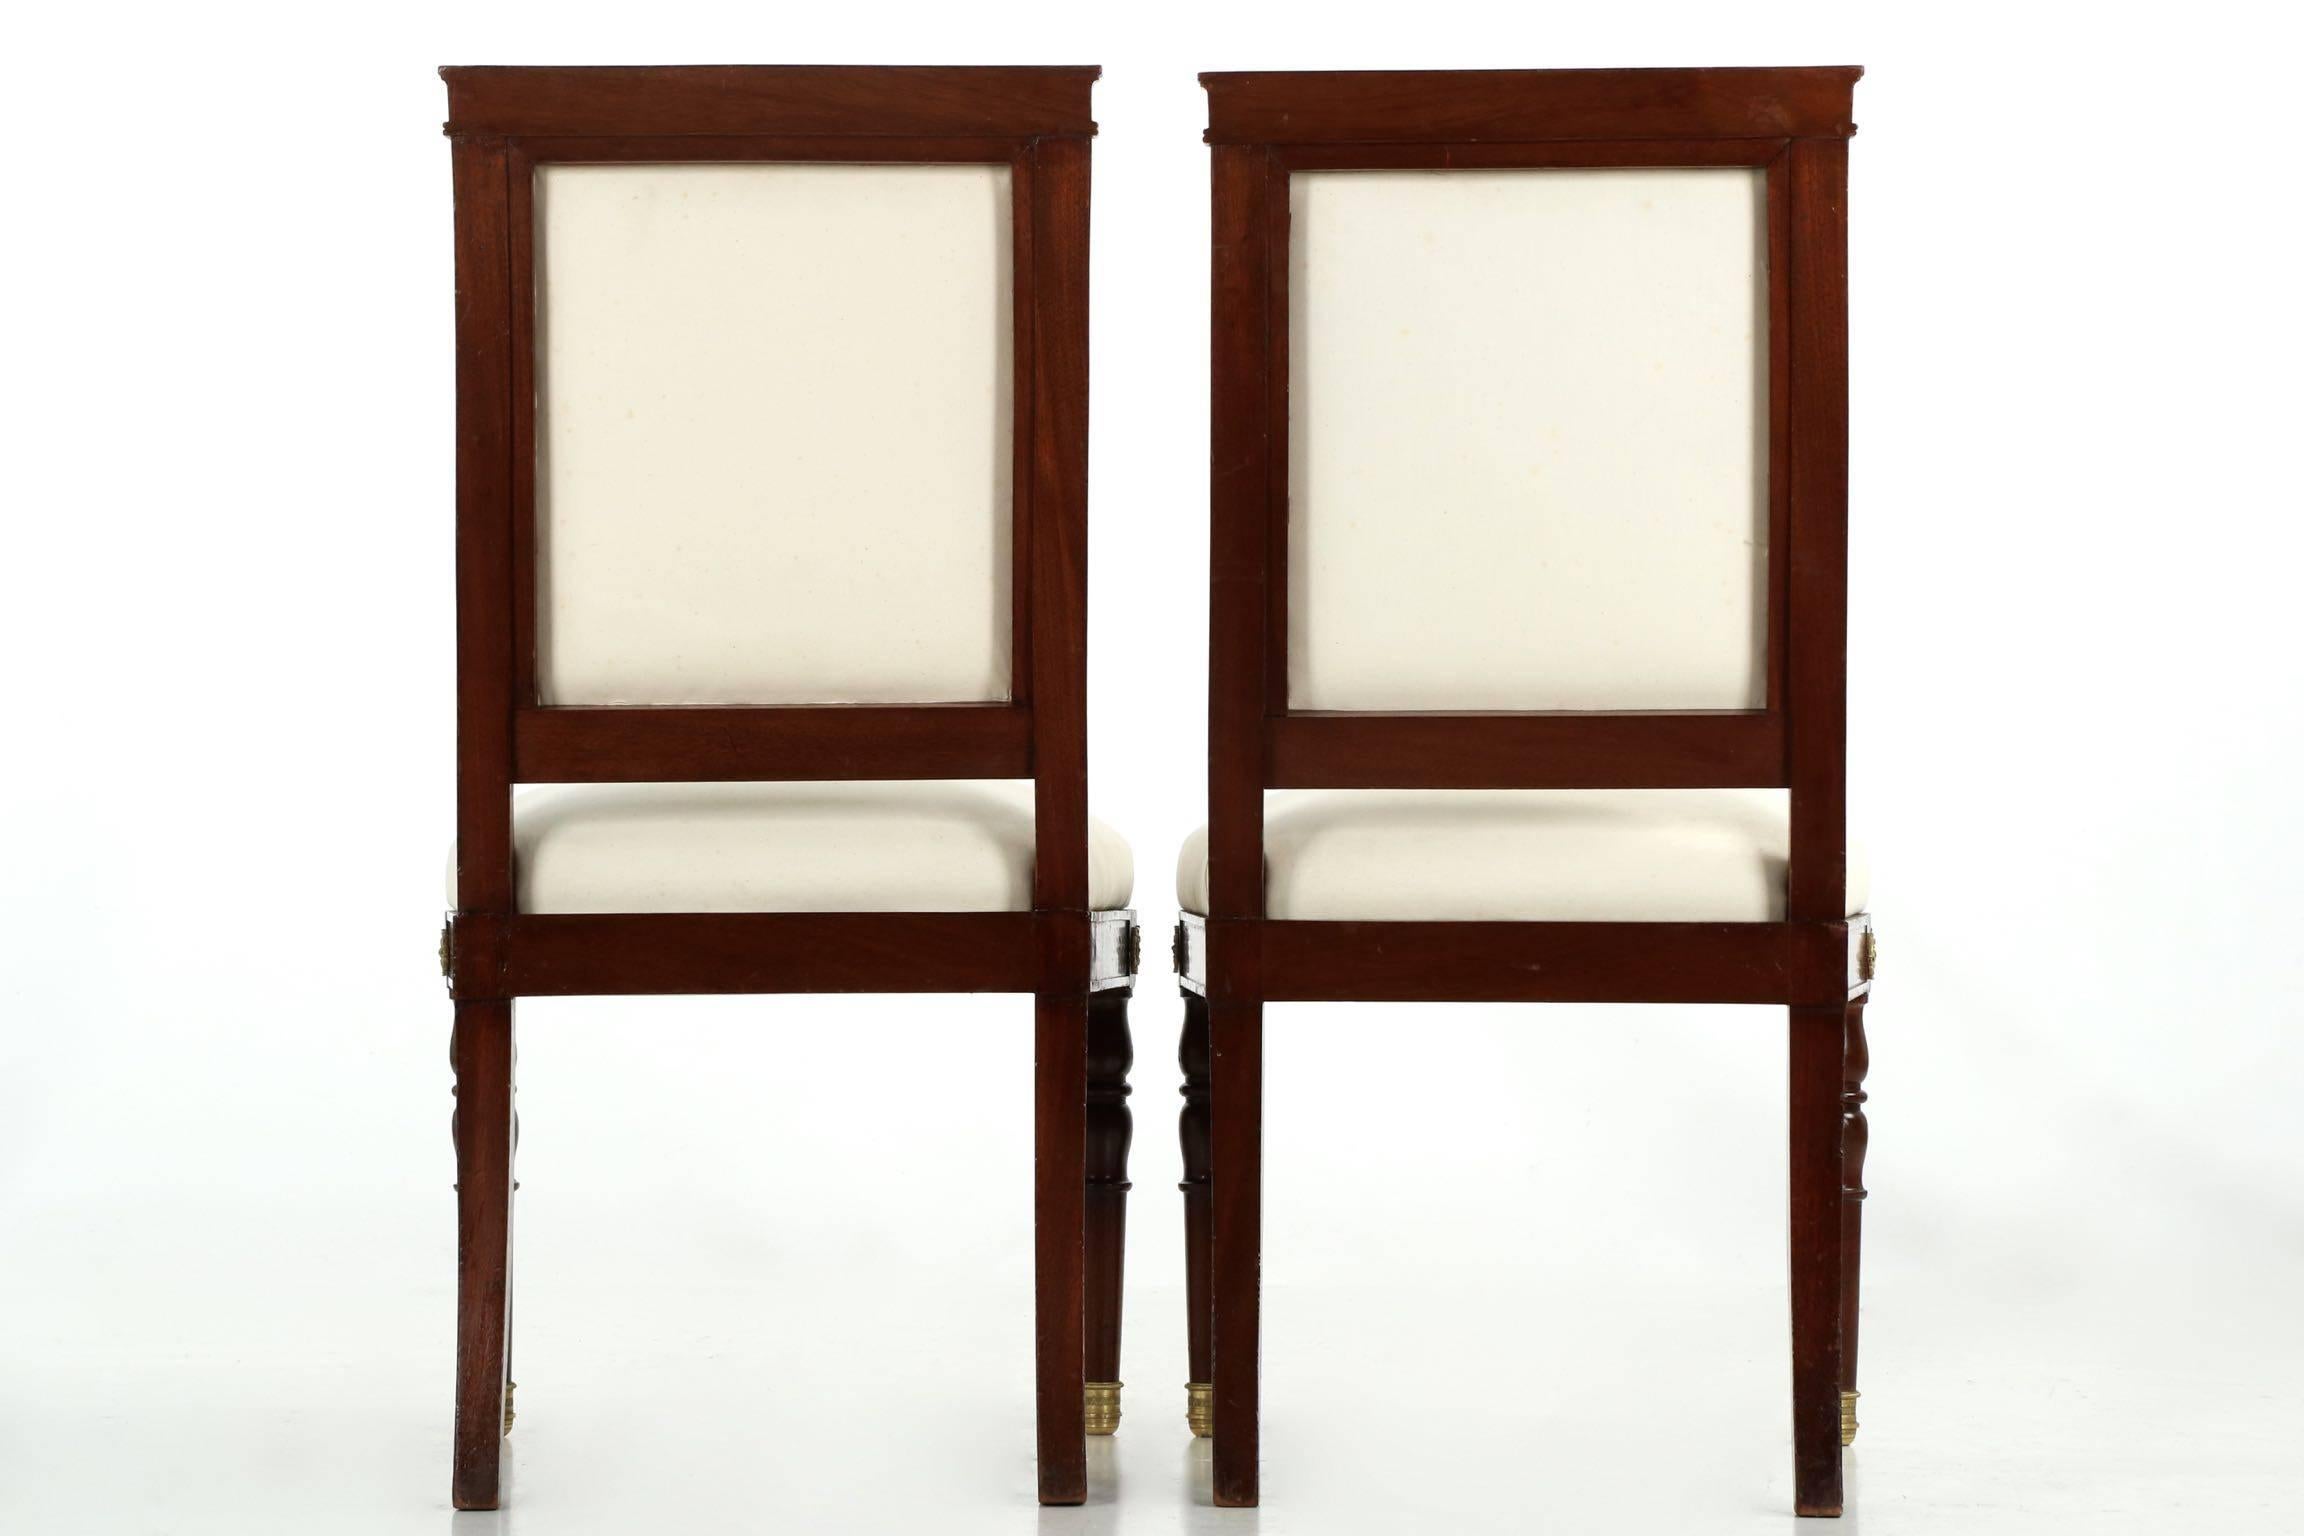 French Excellent Three-Piece Salon Suite in Empire Taste with Two Side Chairs